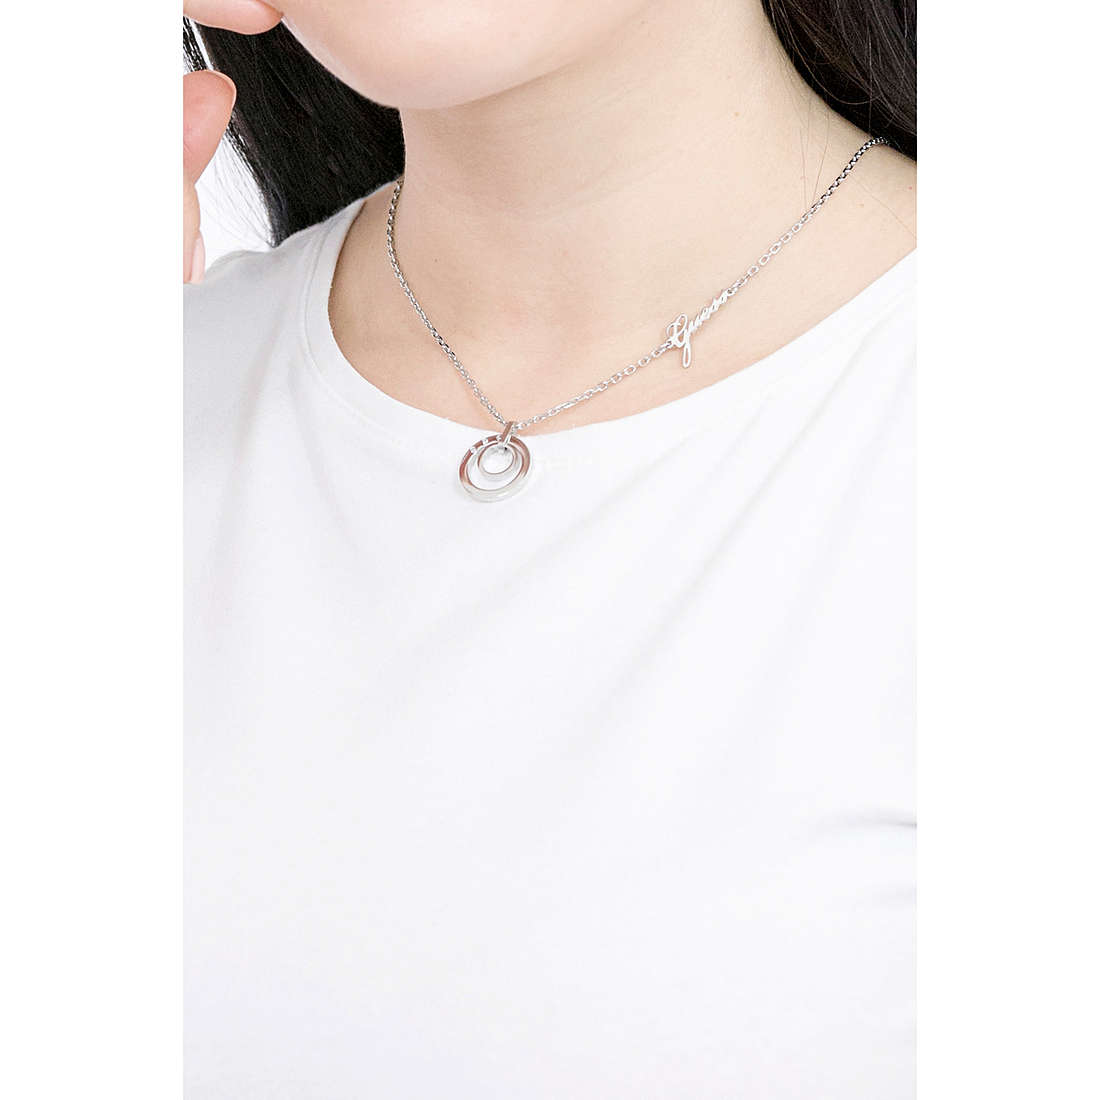 Guess necklaces woman UBN29034 wearing